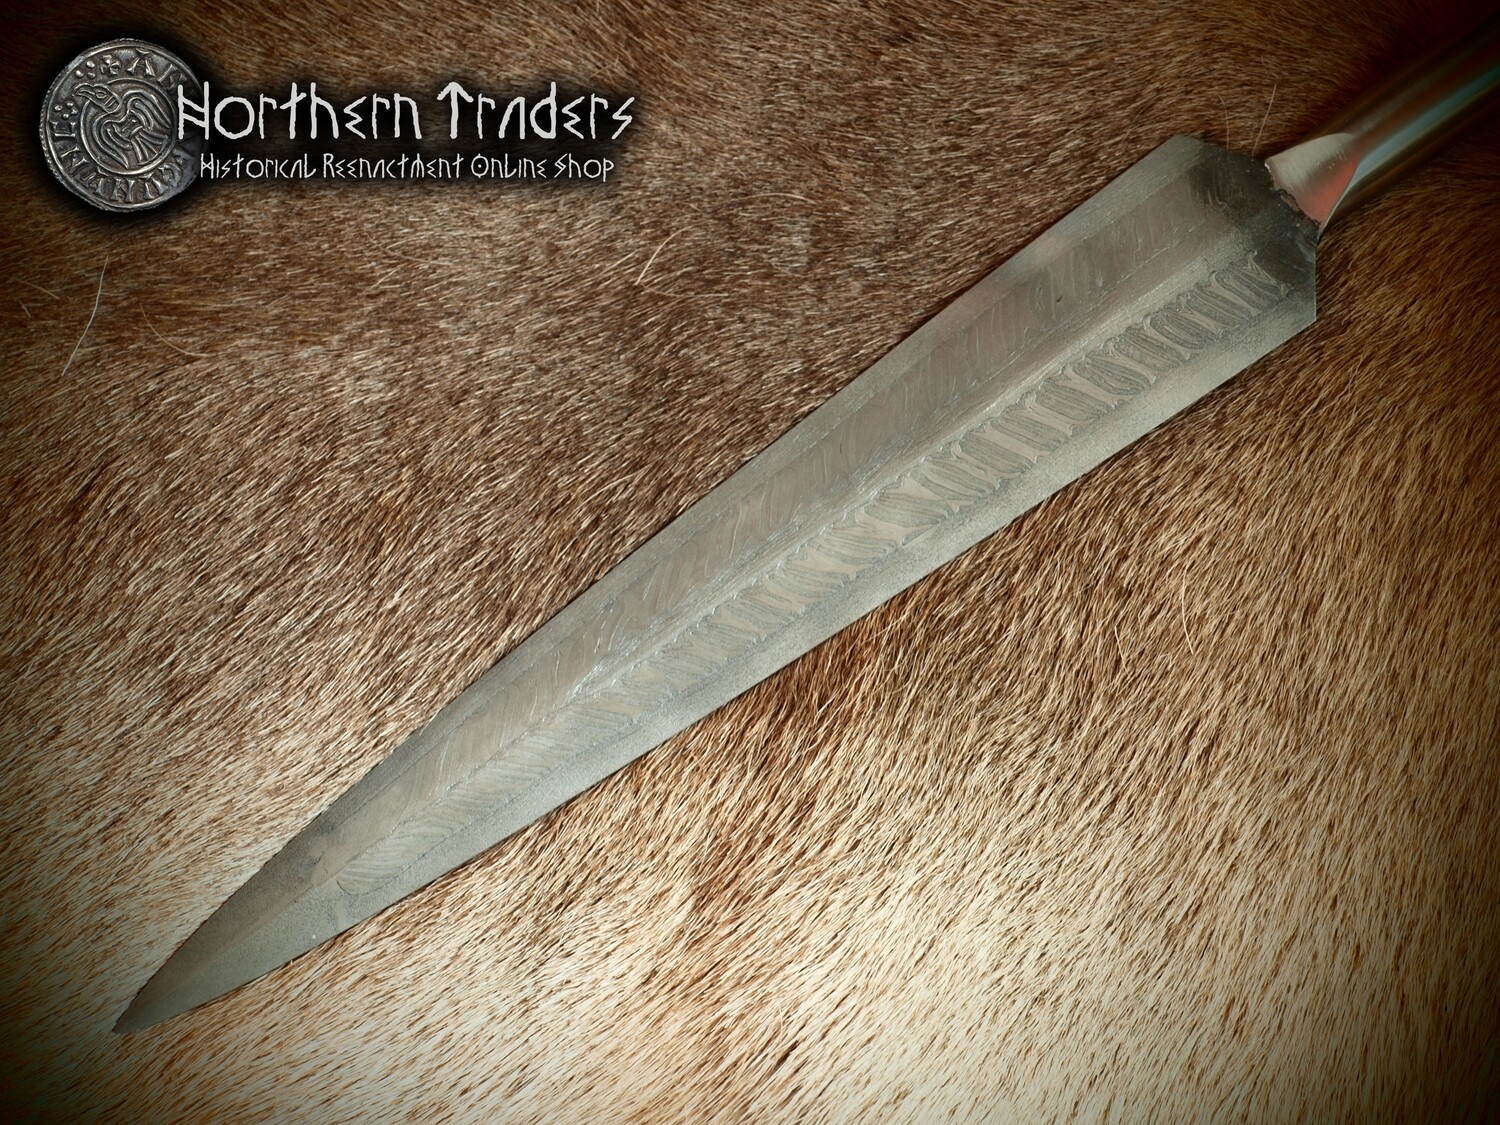 Deluxe Viking Spear with Pattern Welded Damascus Blade